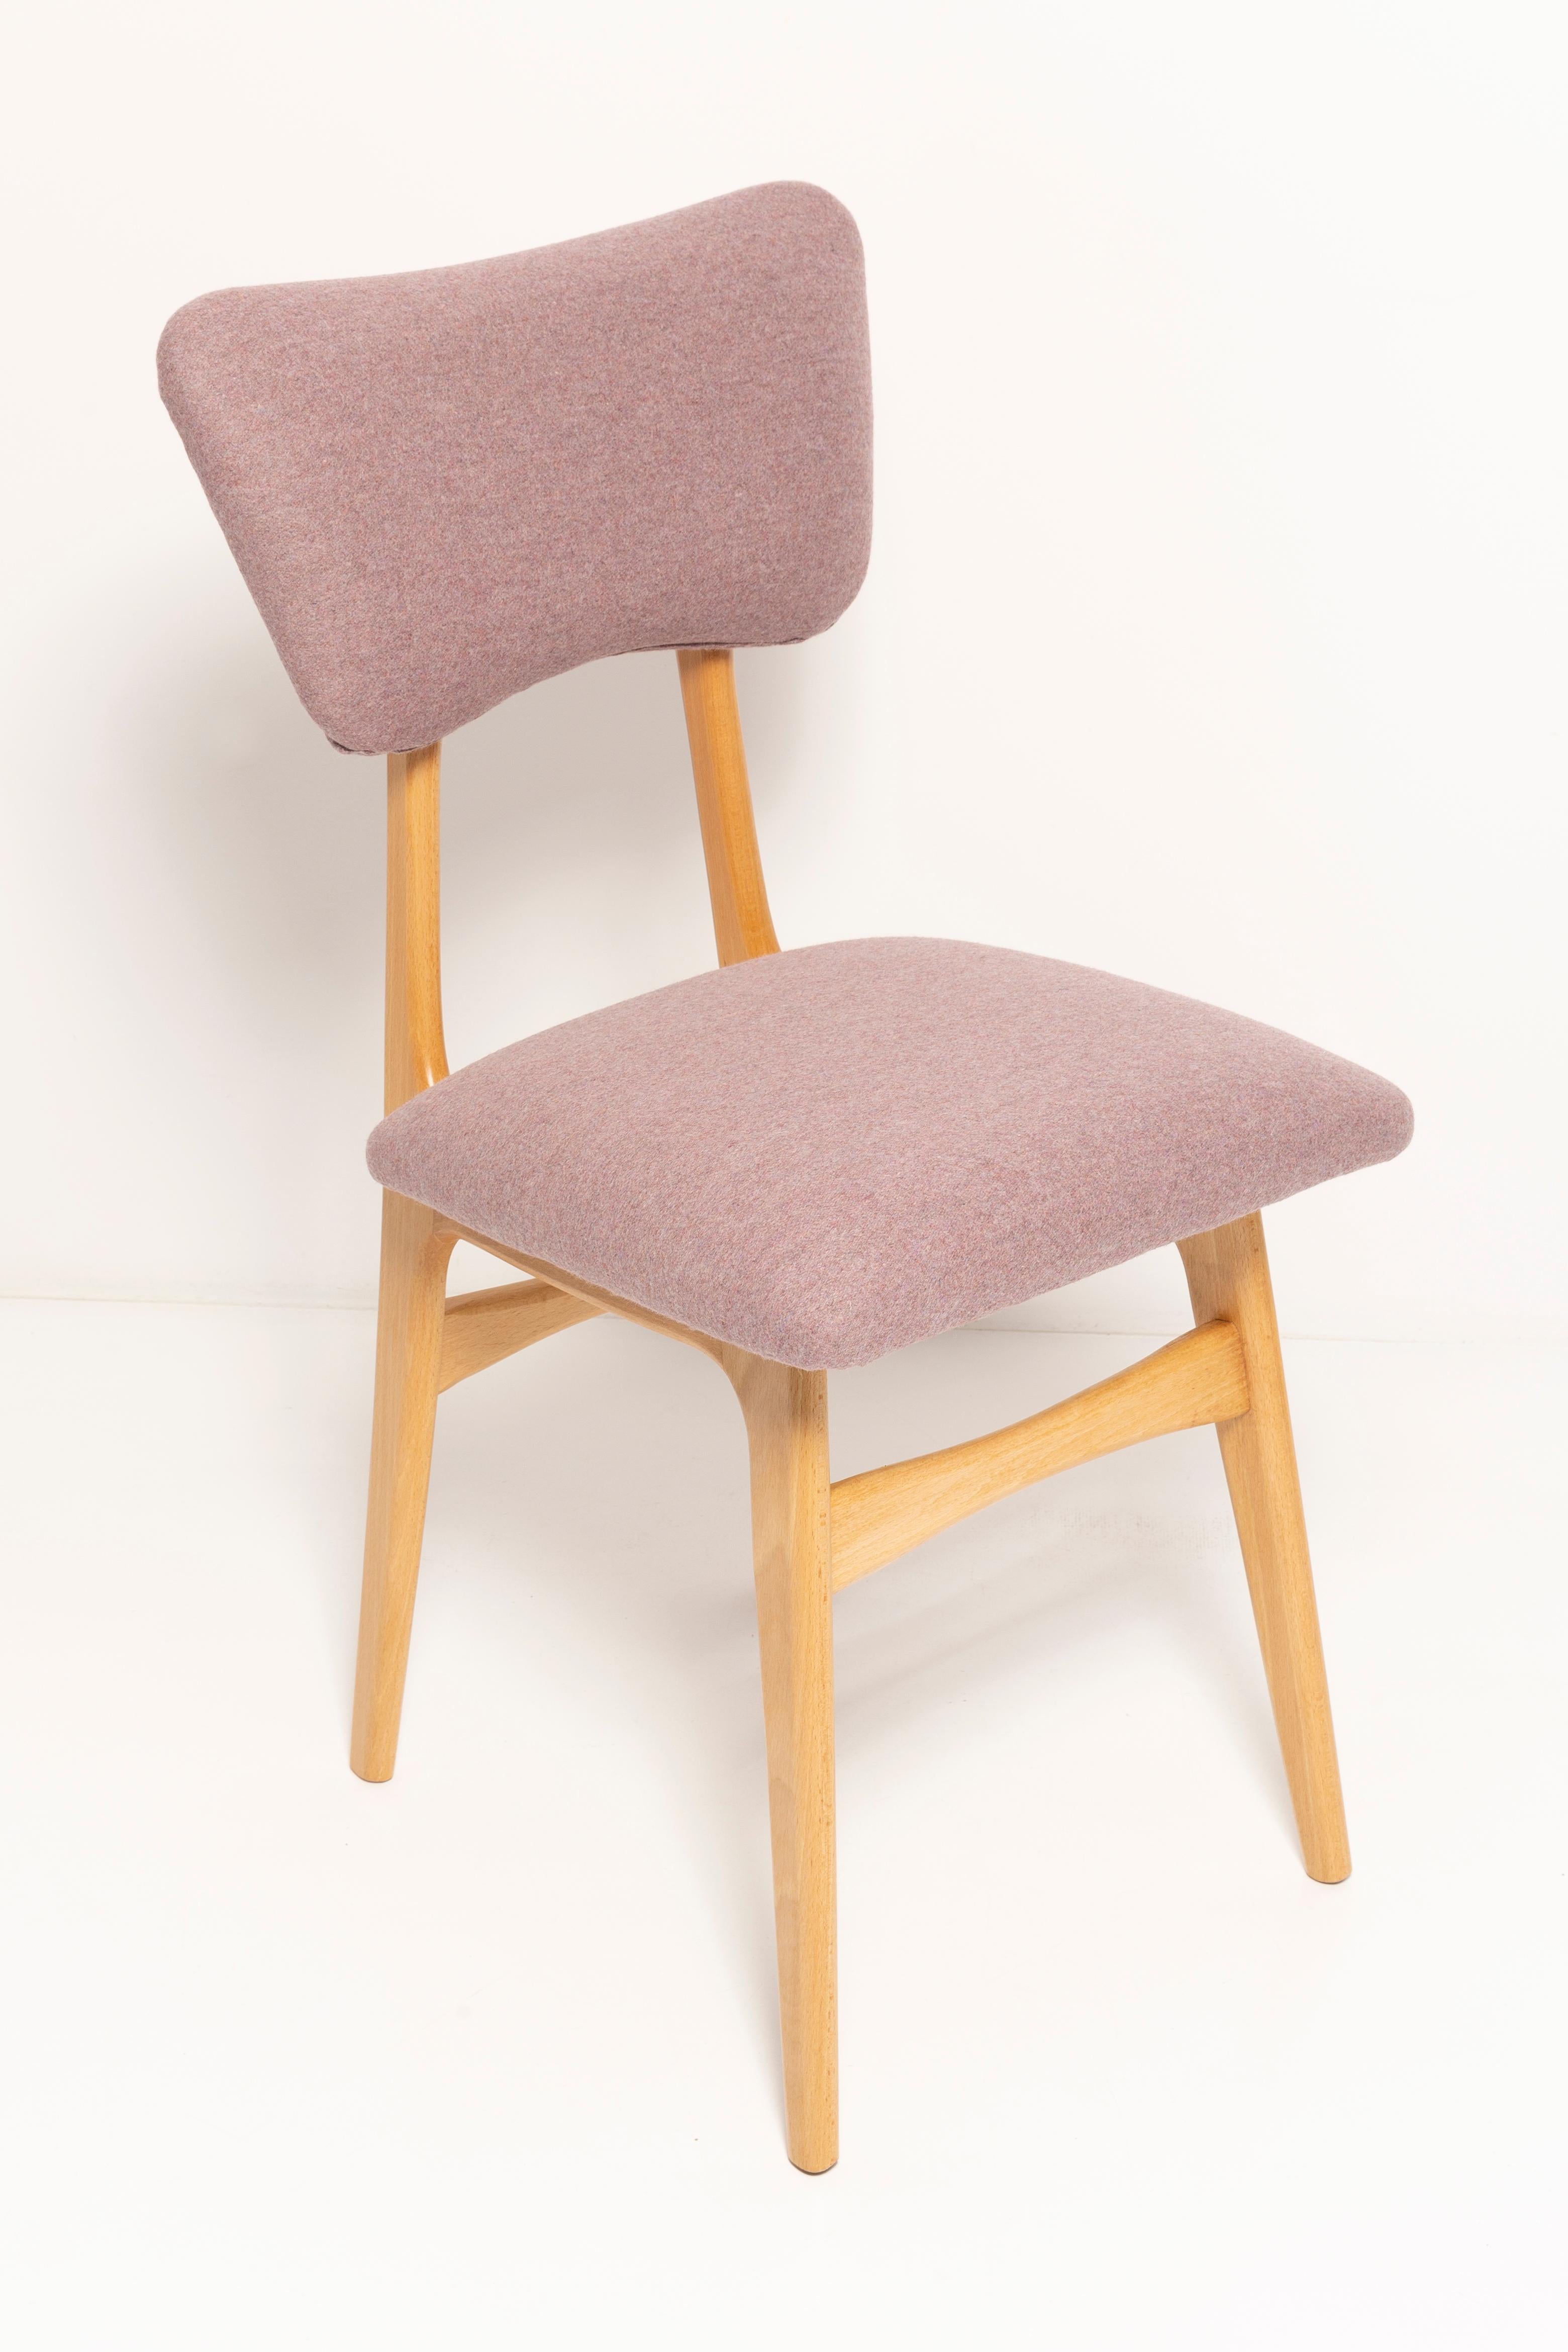 Dining chair called 